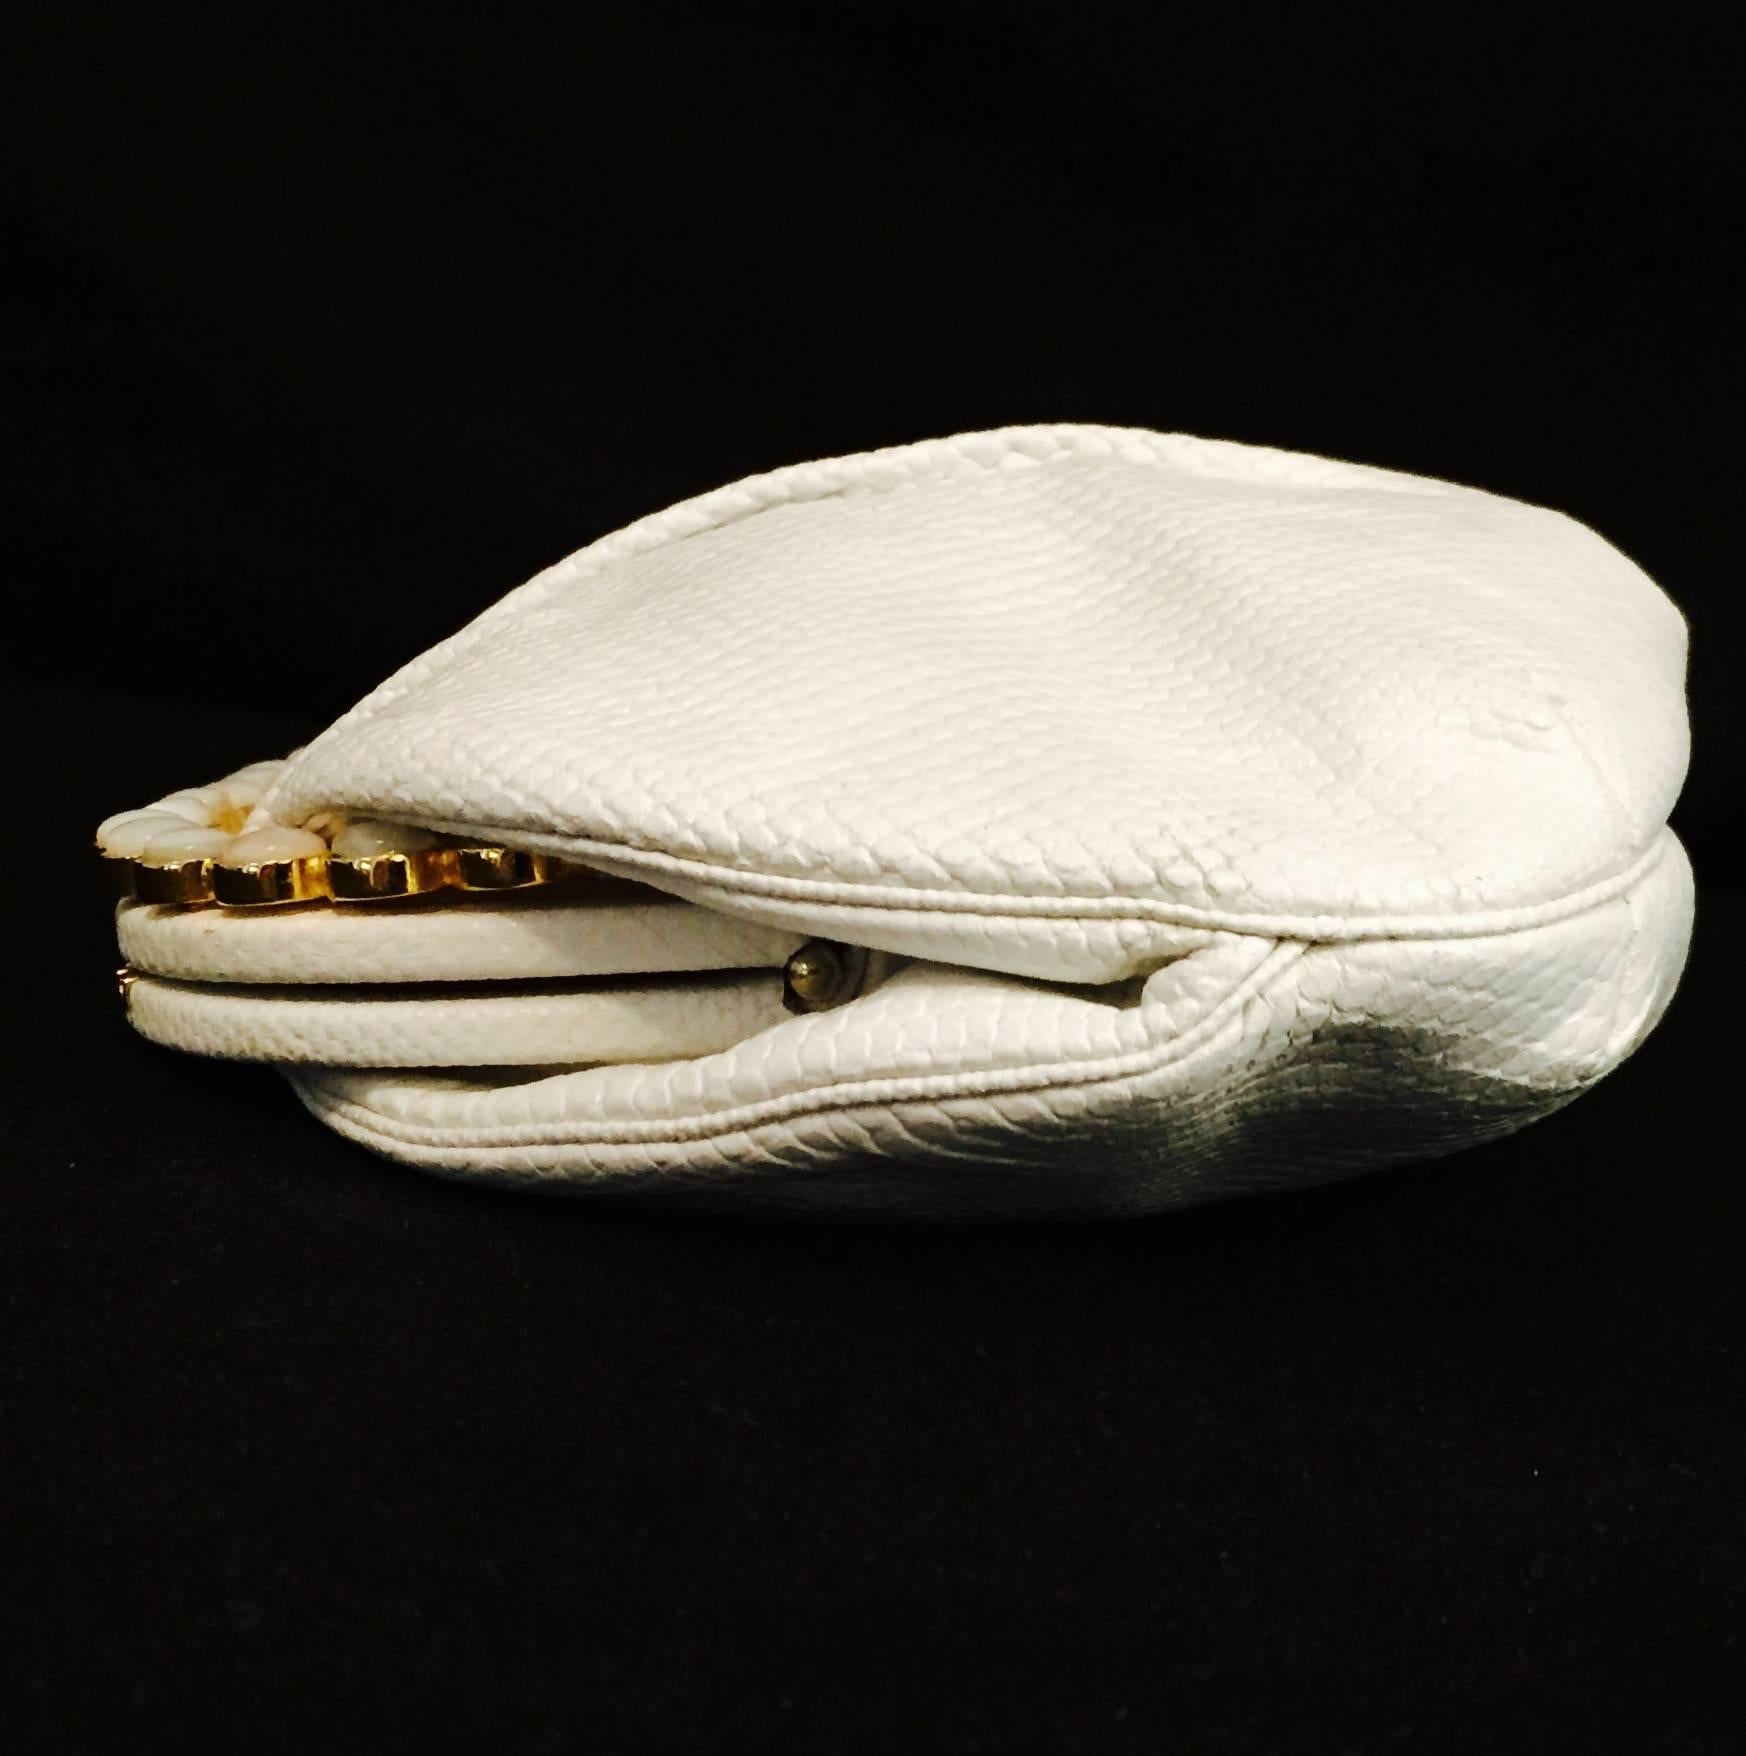 Jeweled Judith Leiber White Lizard Karung Clutch/Shoulder Bag In Excellent Condition For Sale In Palm Beach, FL